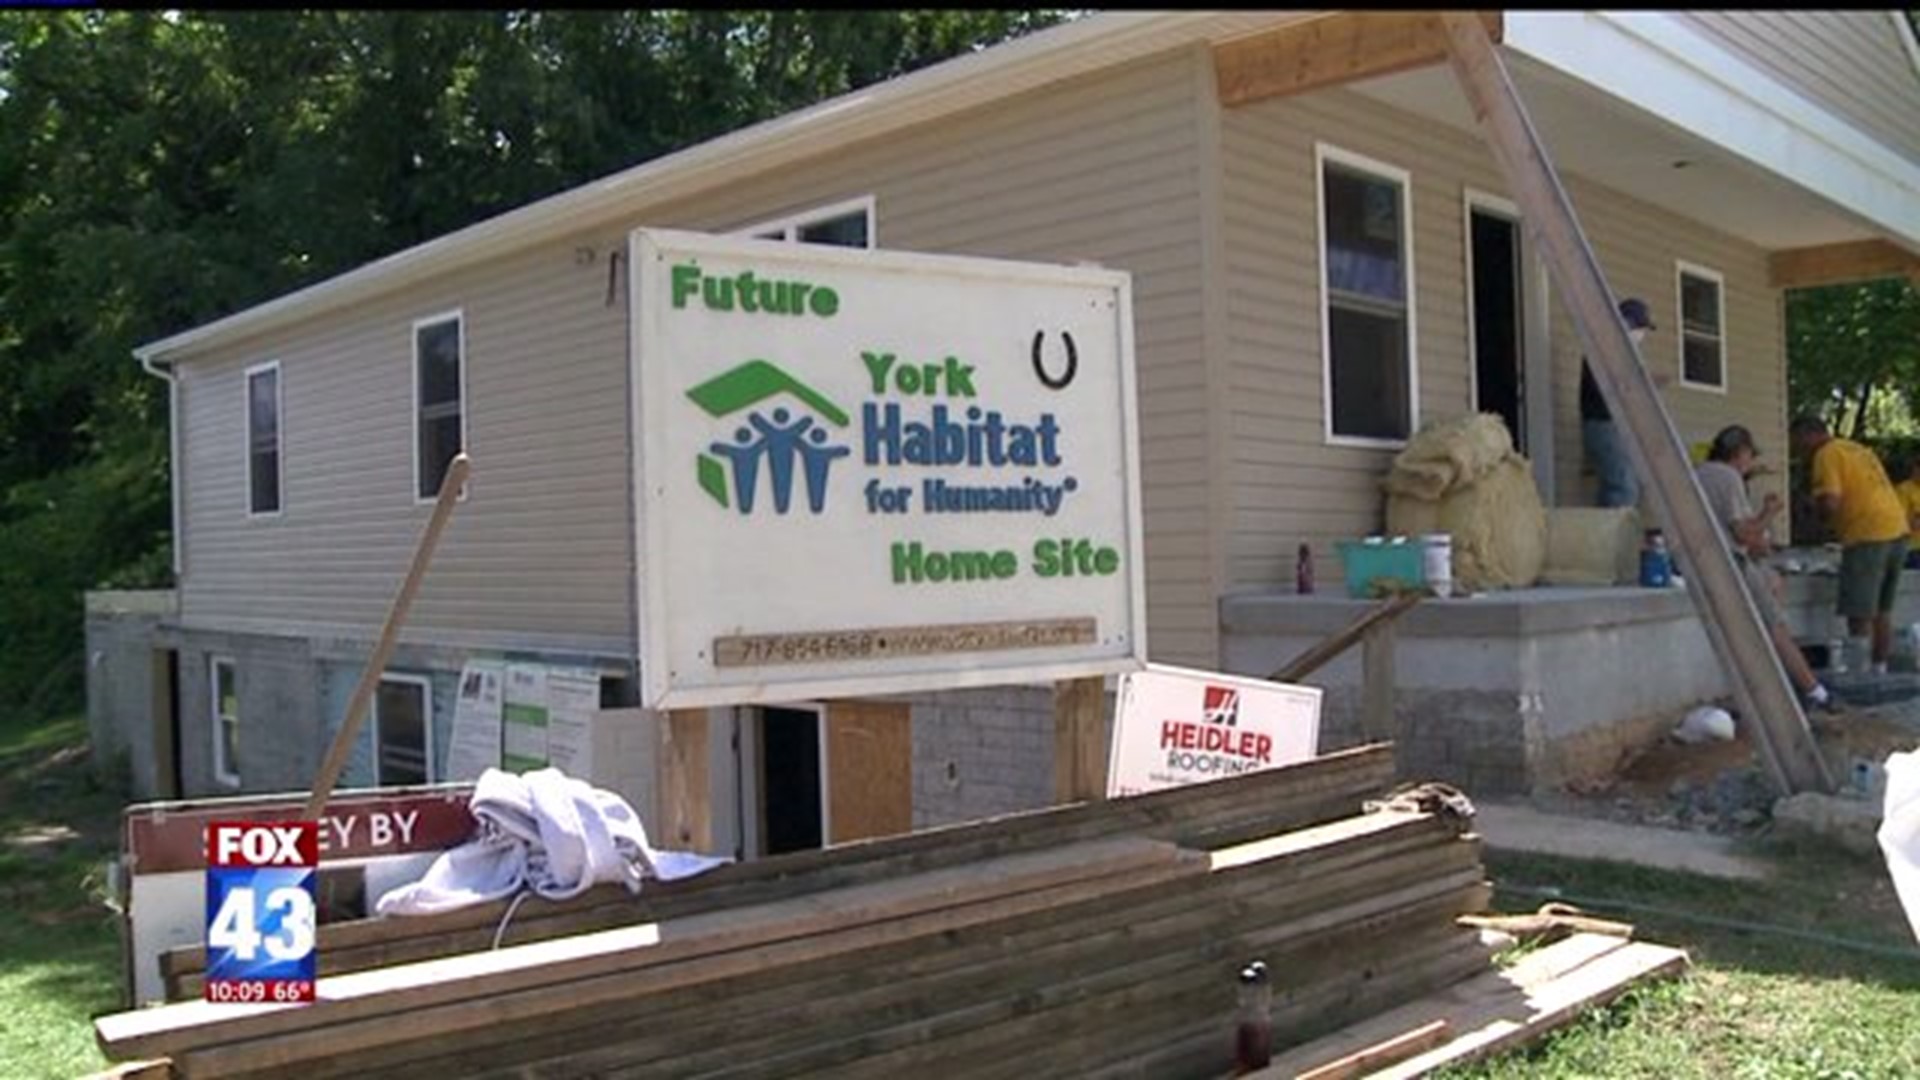 Local Church Teams Up With Habitat for Humanity